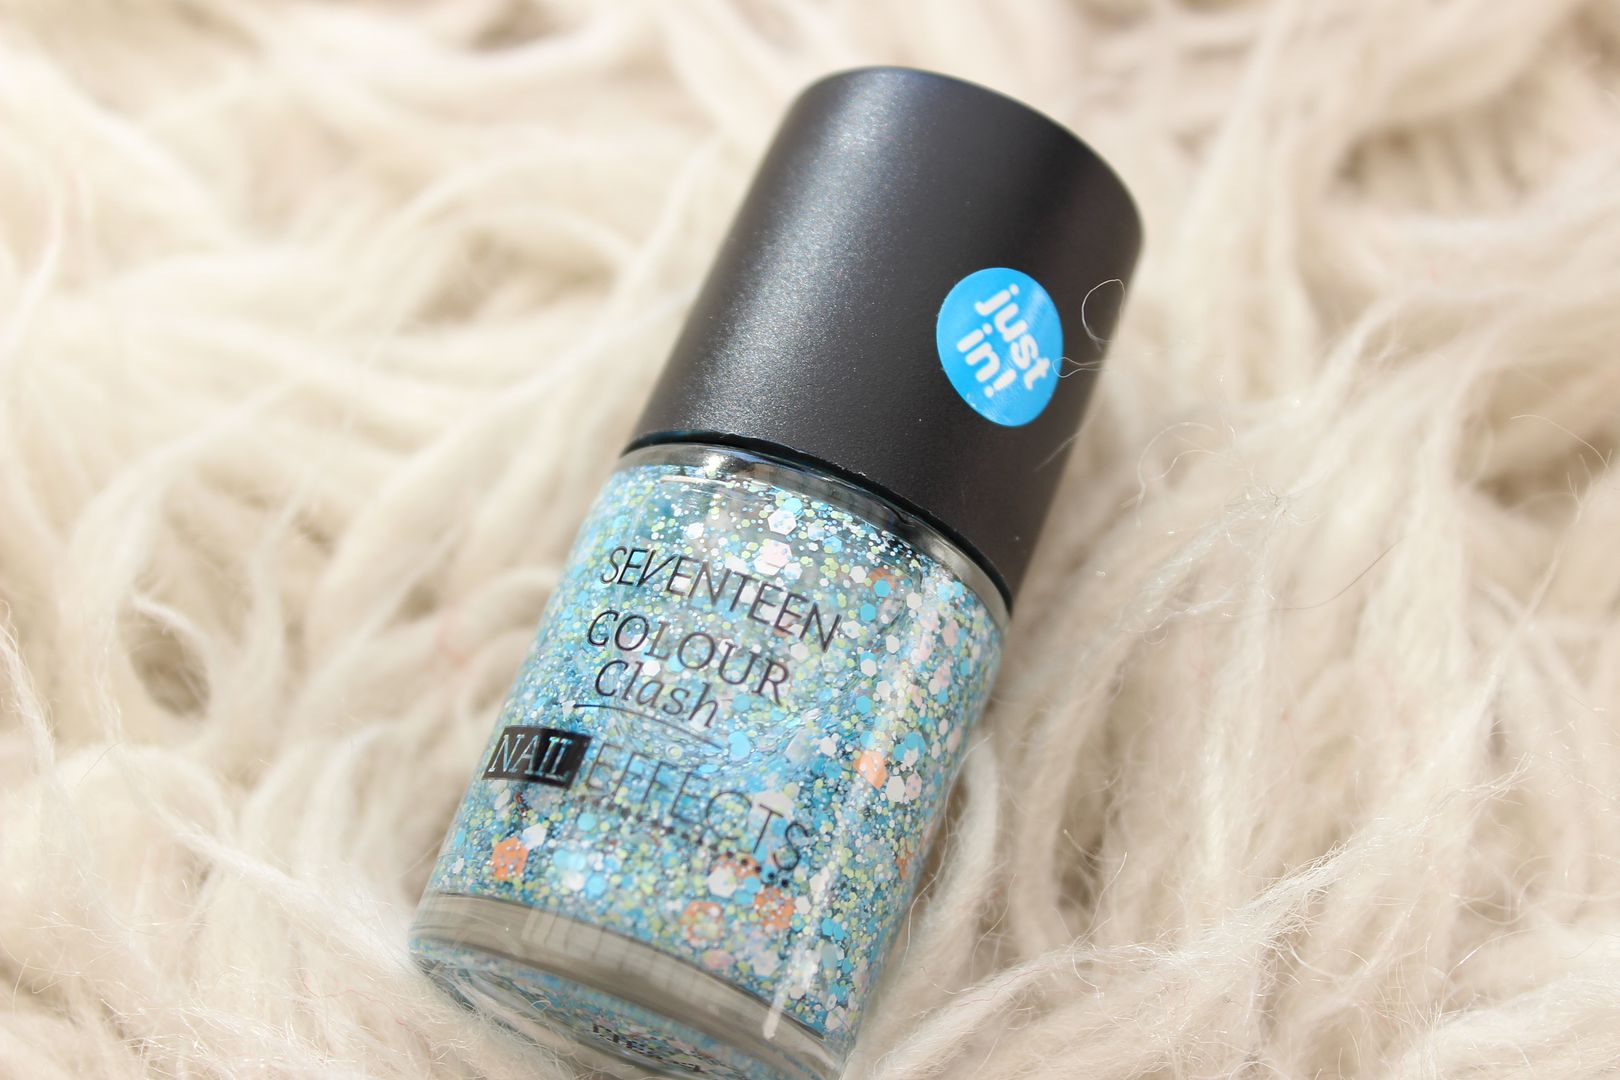 In the Surf Seventeen Colour Clash Nail Effects